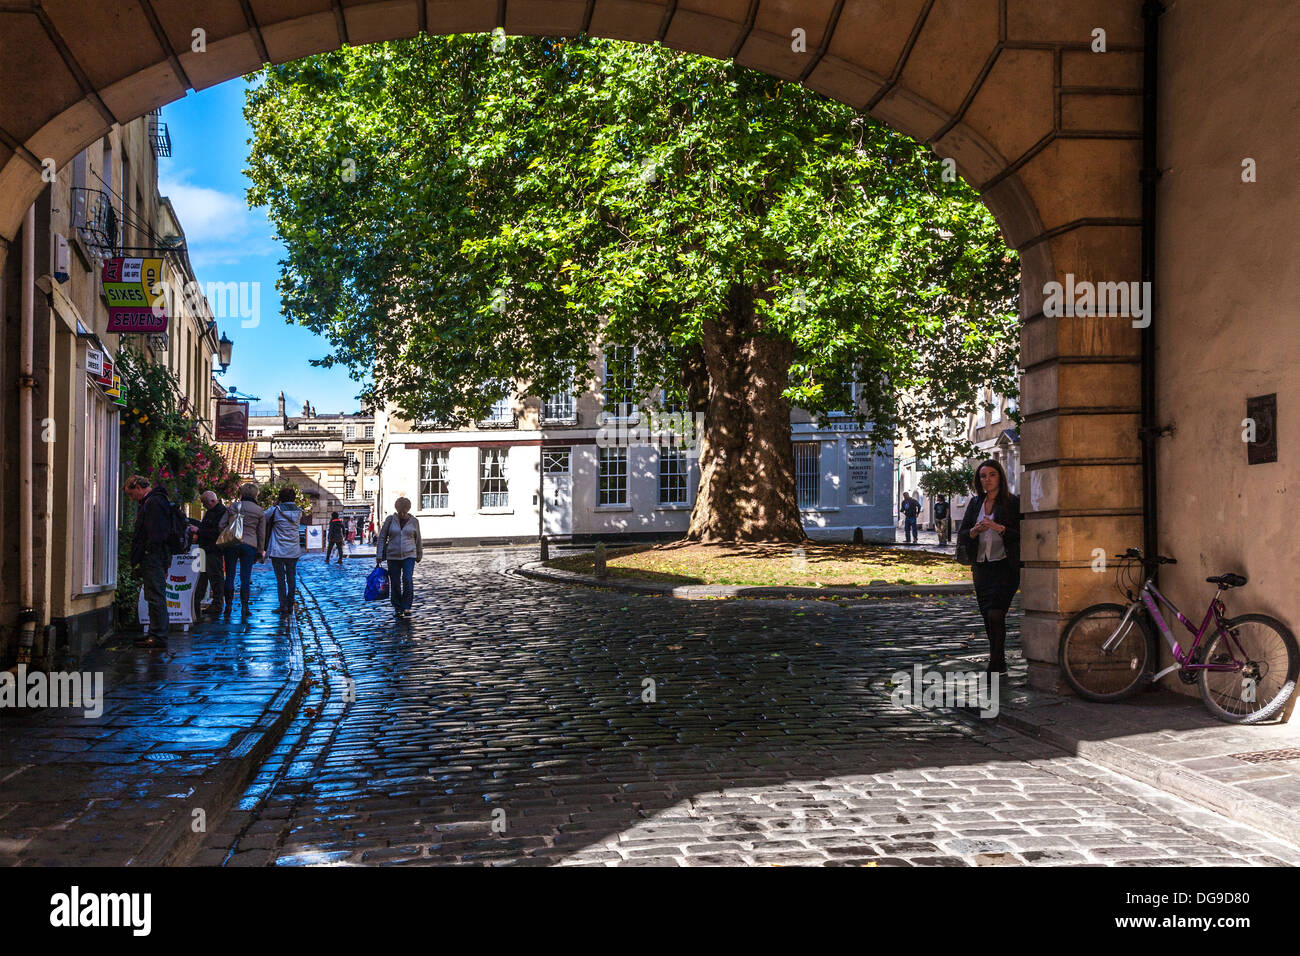 View through an archway to Abbey Green, a picturesque square in the heart of the historic city of Bath. Stock Photo